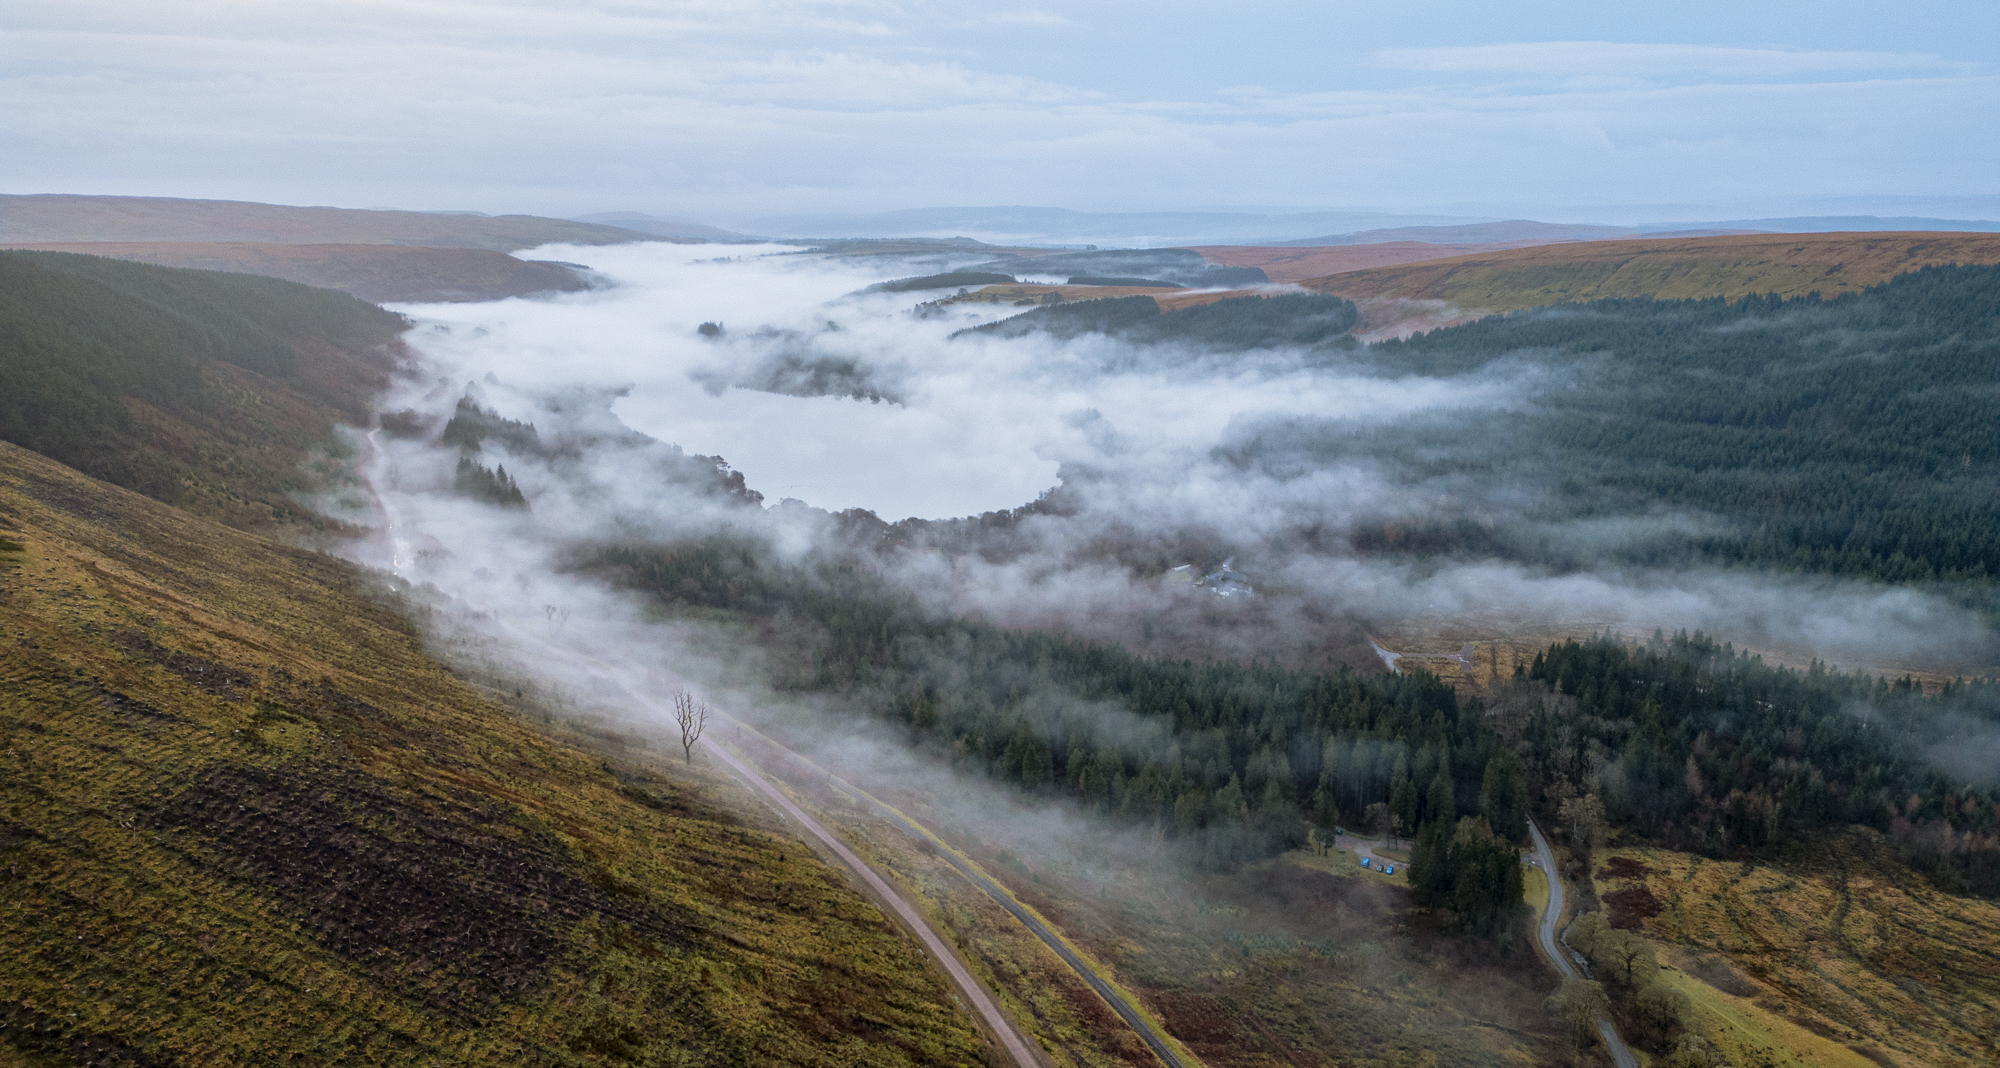 Brecon Beacons lakes under low cloud and mist at dawn.